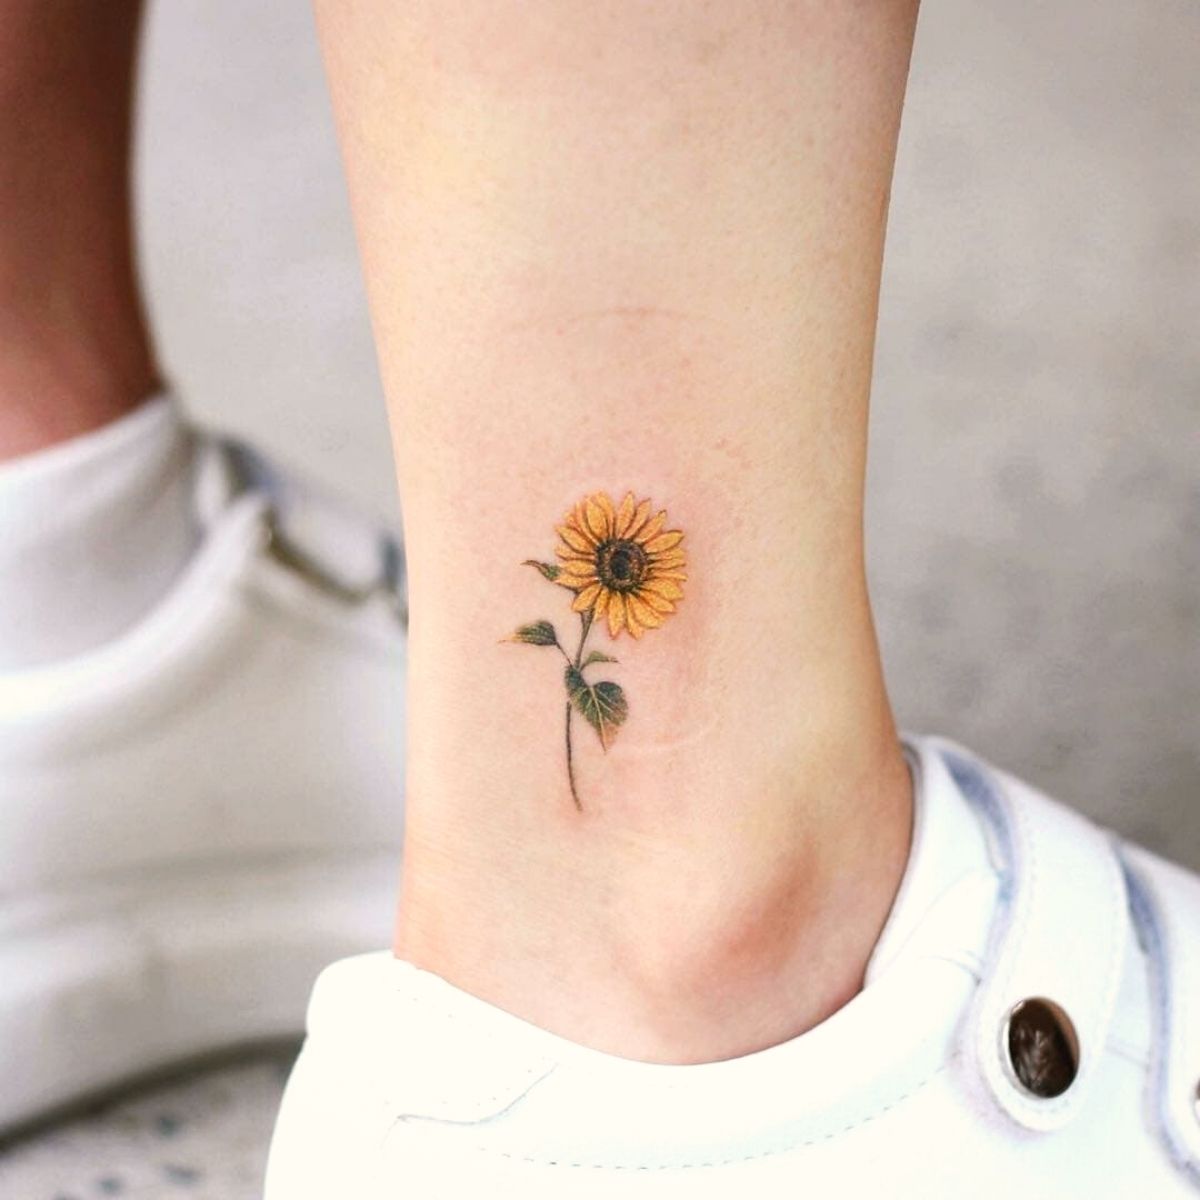 Small meaningful tattoos of sunflowers on Thursd